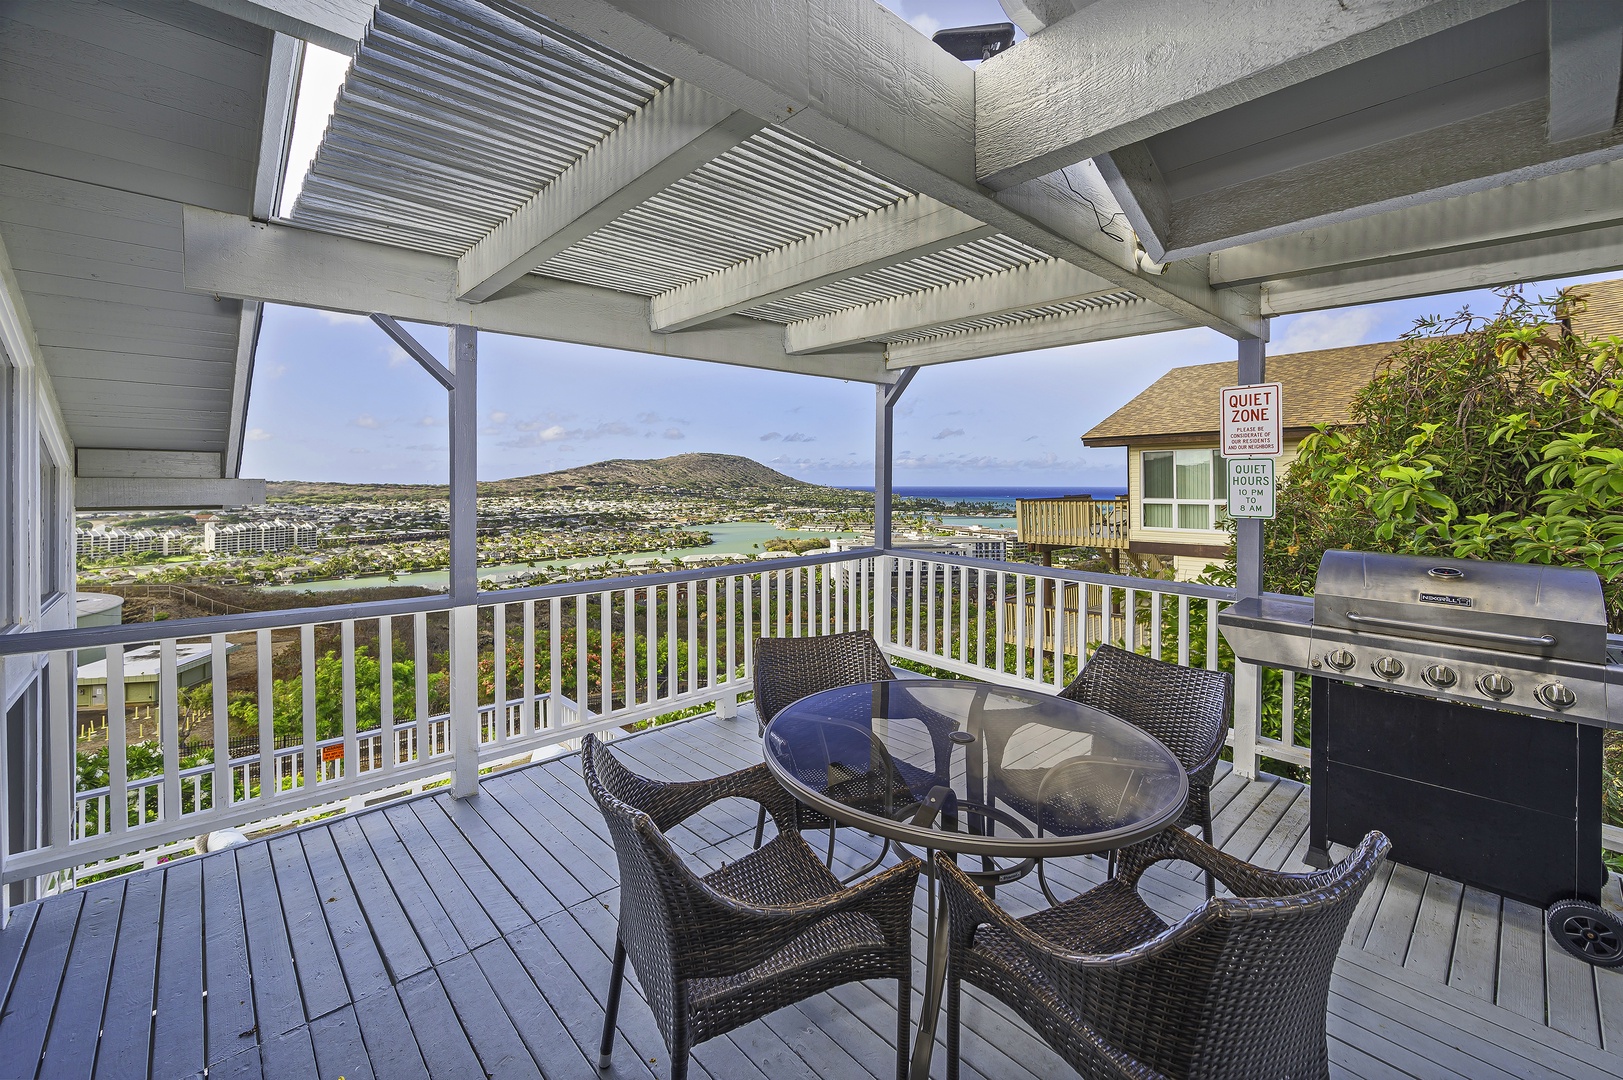 Honolulu Vacation Rentals, Hale Malia - Enjoy outdoor dining, comfortably seating 4, with a Gas BBQ